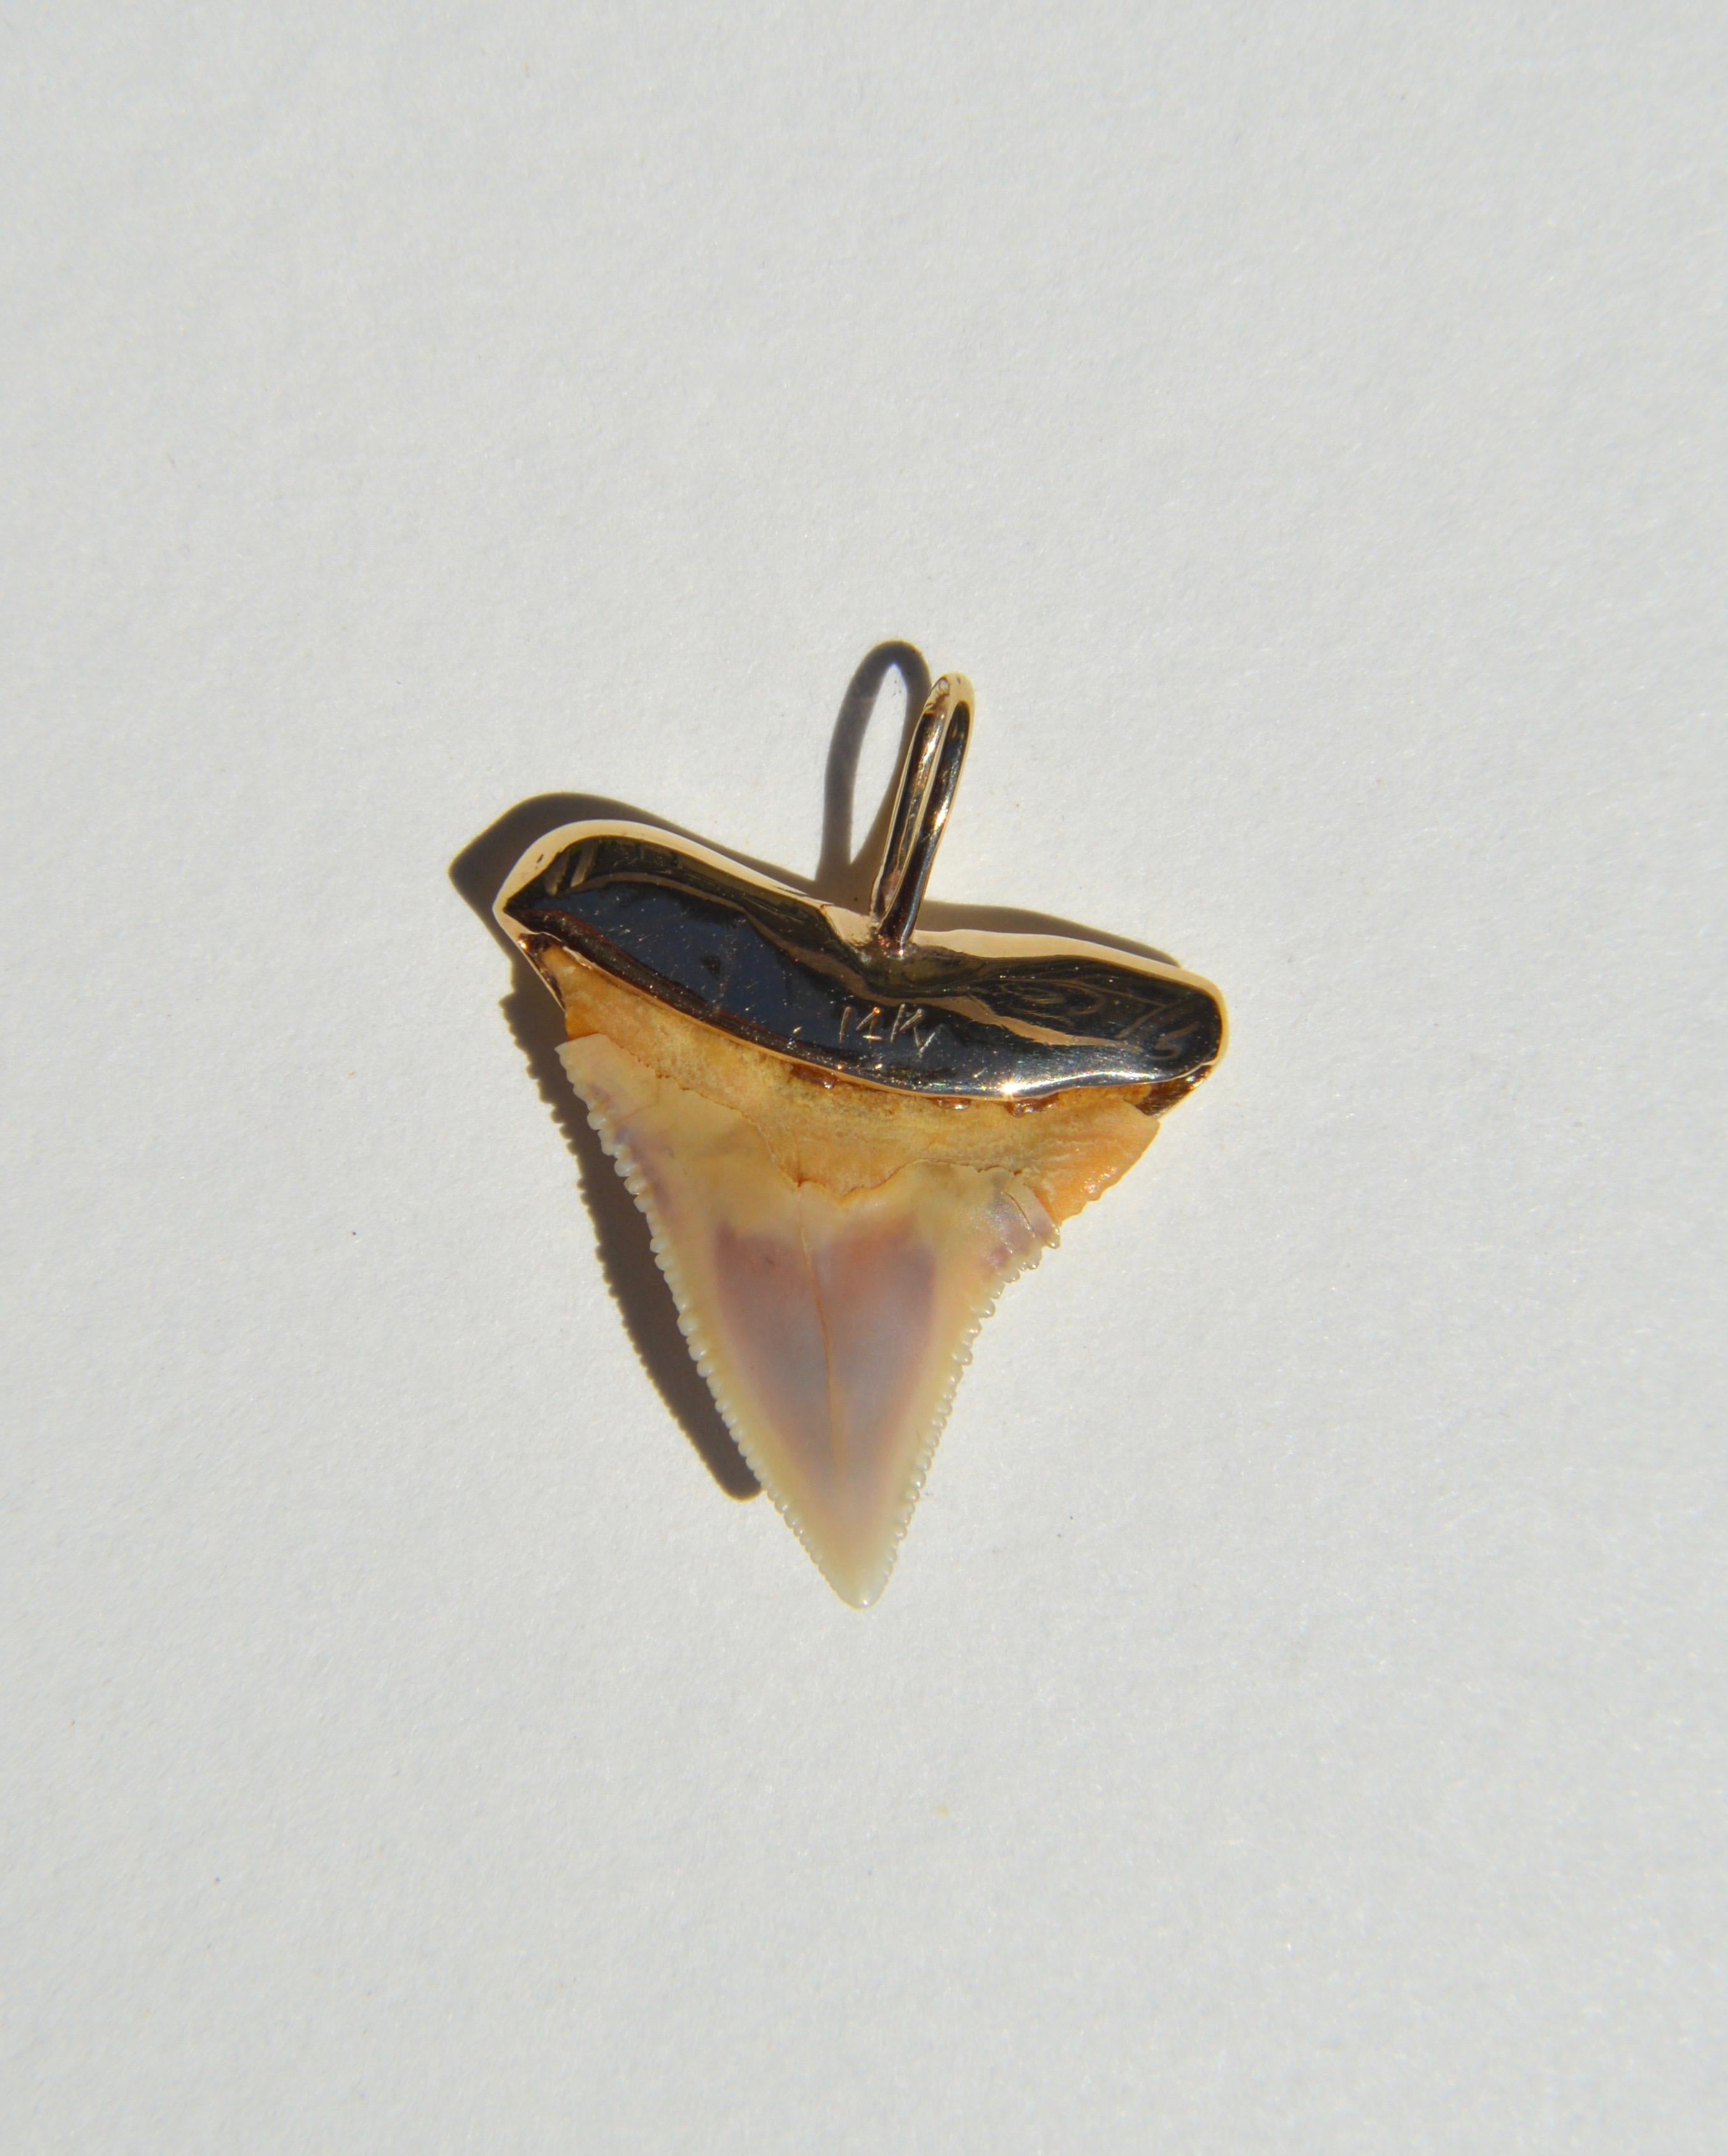 Gorgeous vintage 1980s 14K yellow gold shark tooth charm. Stamped as 14K gold. 1 1/8